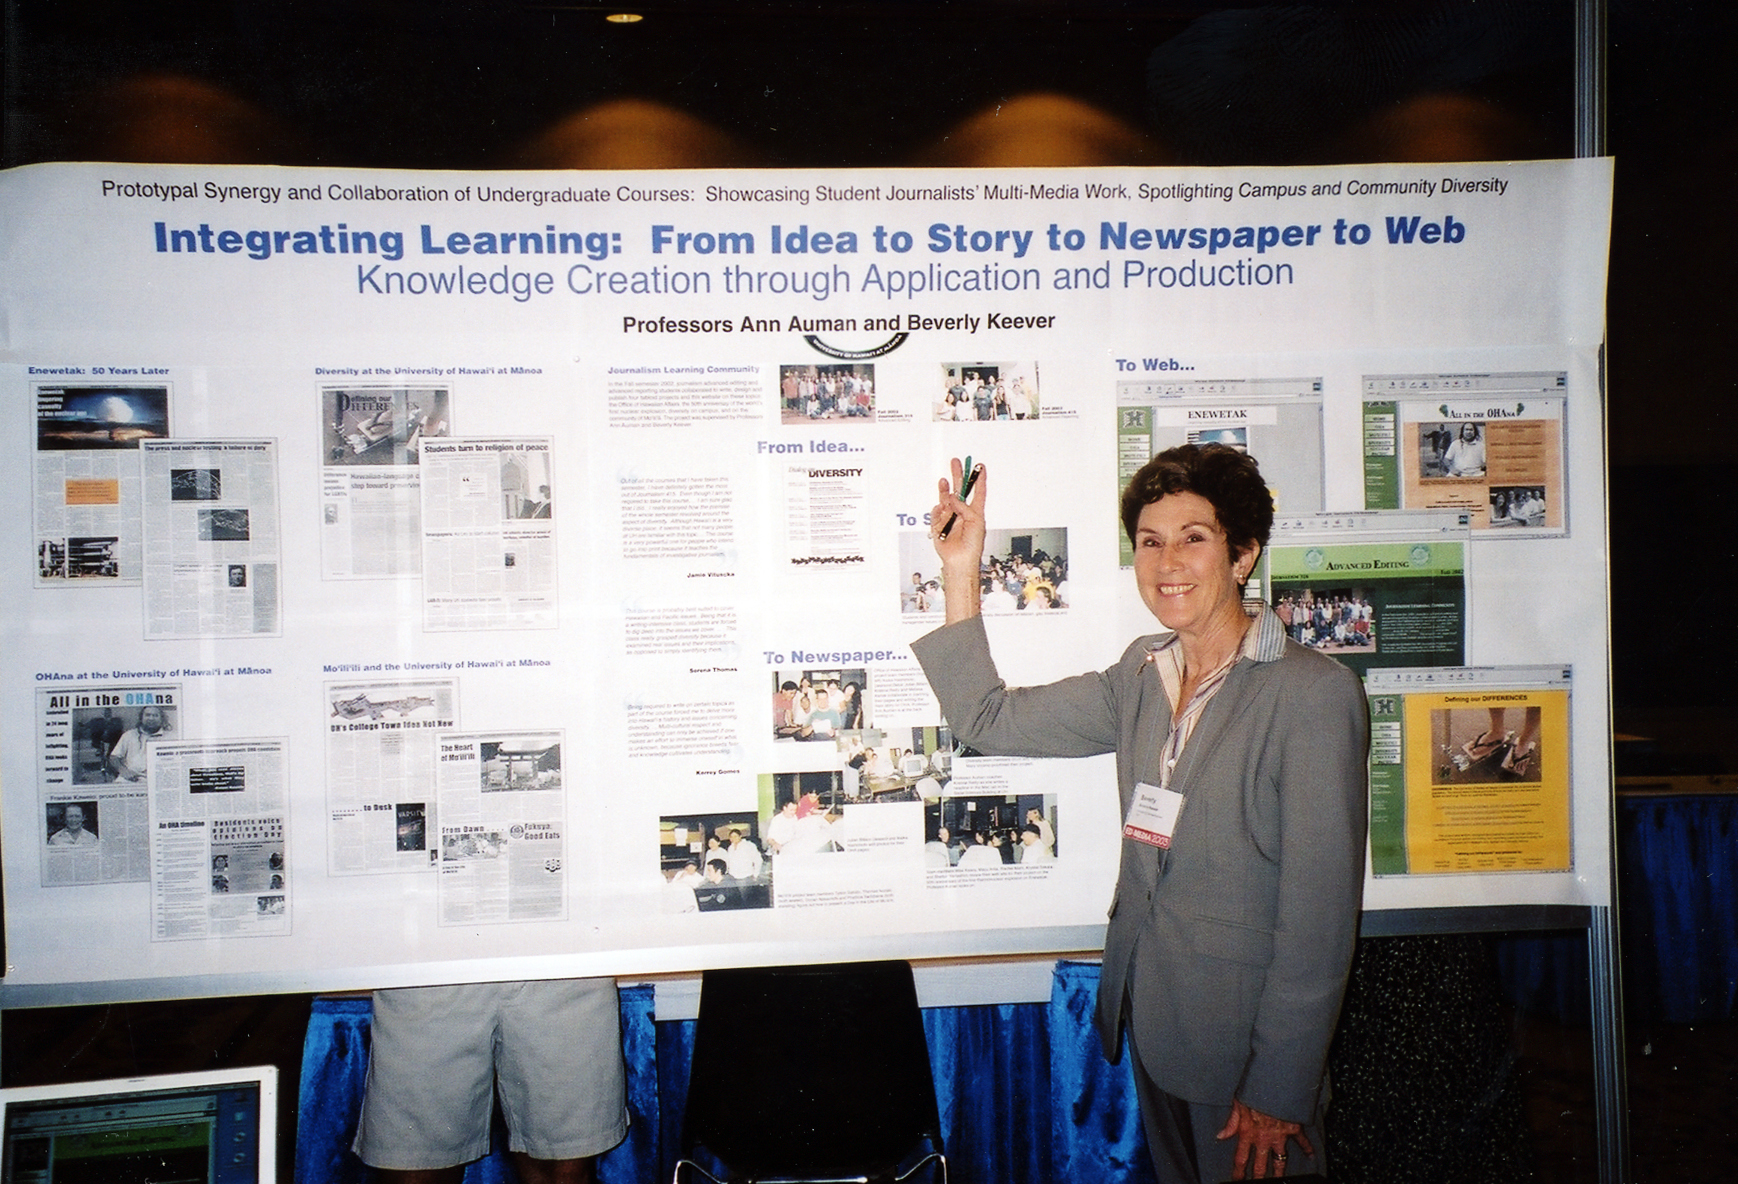 Beverly Keever with a conference poster